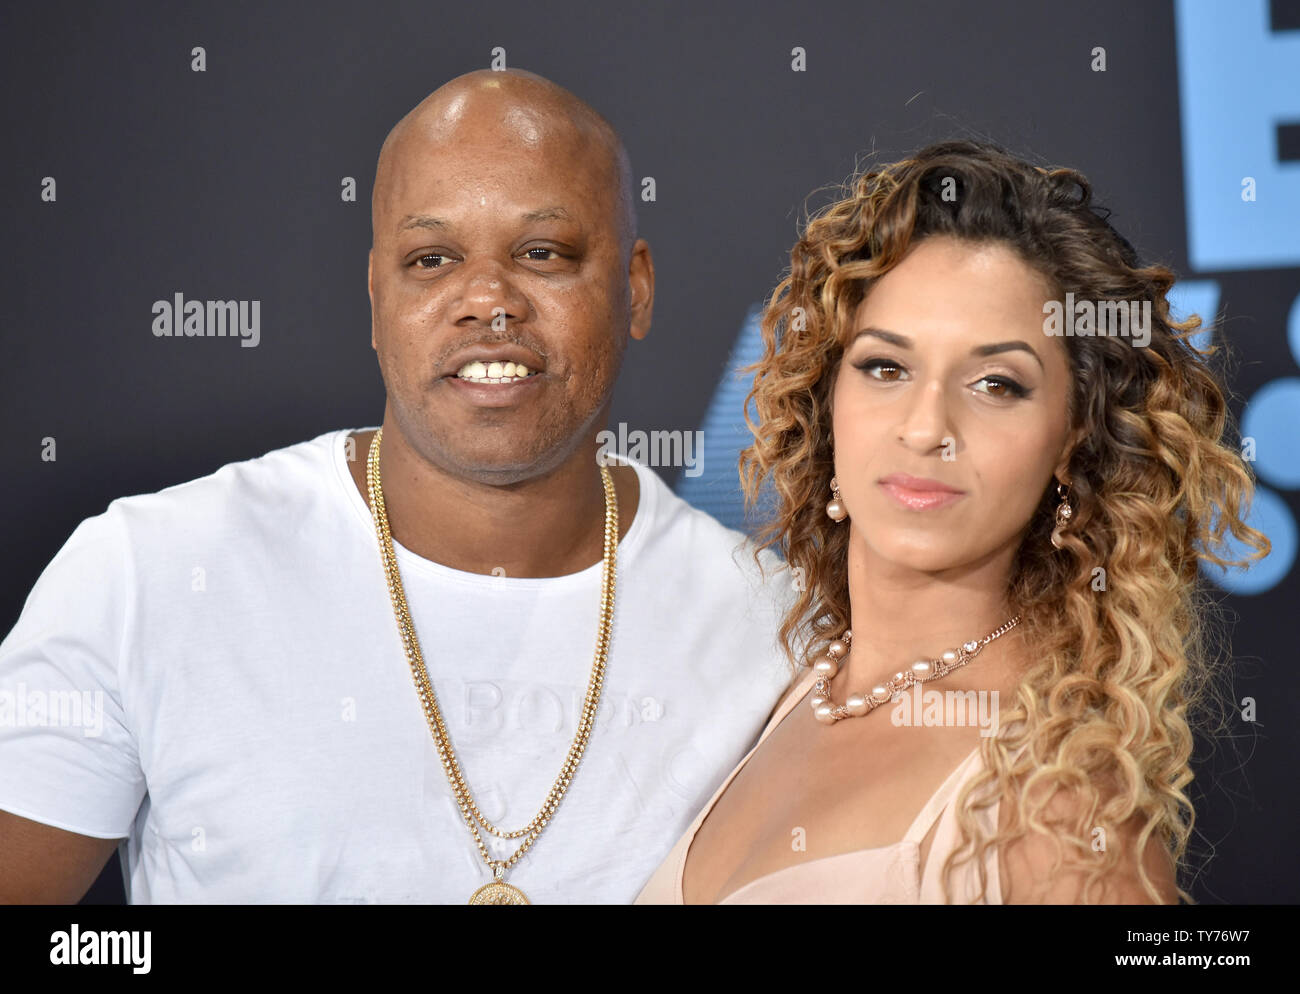 Rapper Too Short (L) and guest attend the 17th annual BET Awards at  Microsoft Theater in Los Angeles on June 25, 2017. The ceremony celebrates  achievements in entertainment and honors music, sports